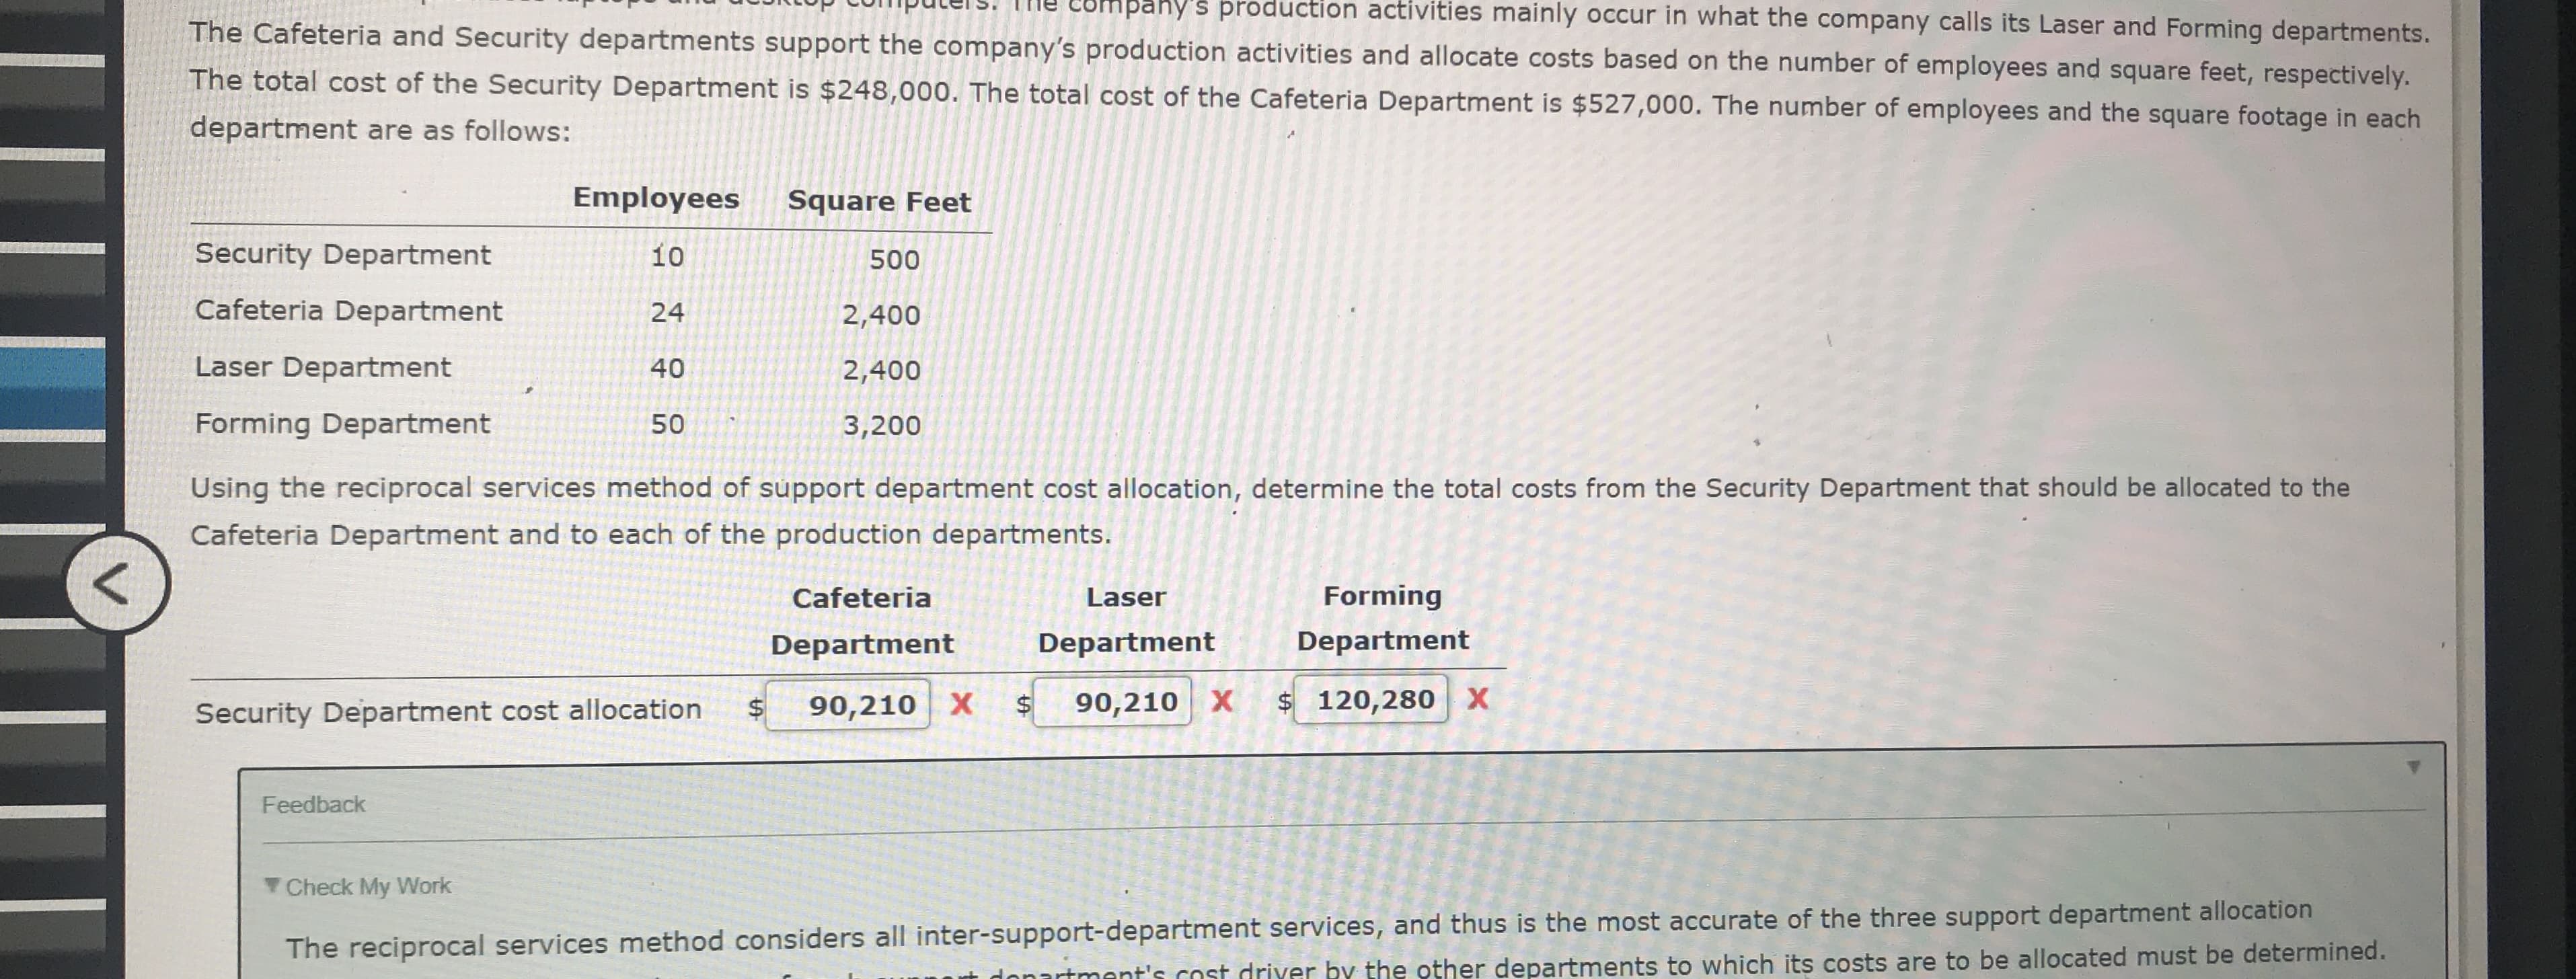 Using the reciprocal services method of support department cost allocation, determine the total costs from the Security Department that should be allocated to the
Cafeteria Department and to each of the production departments.
